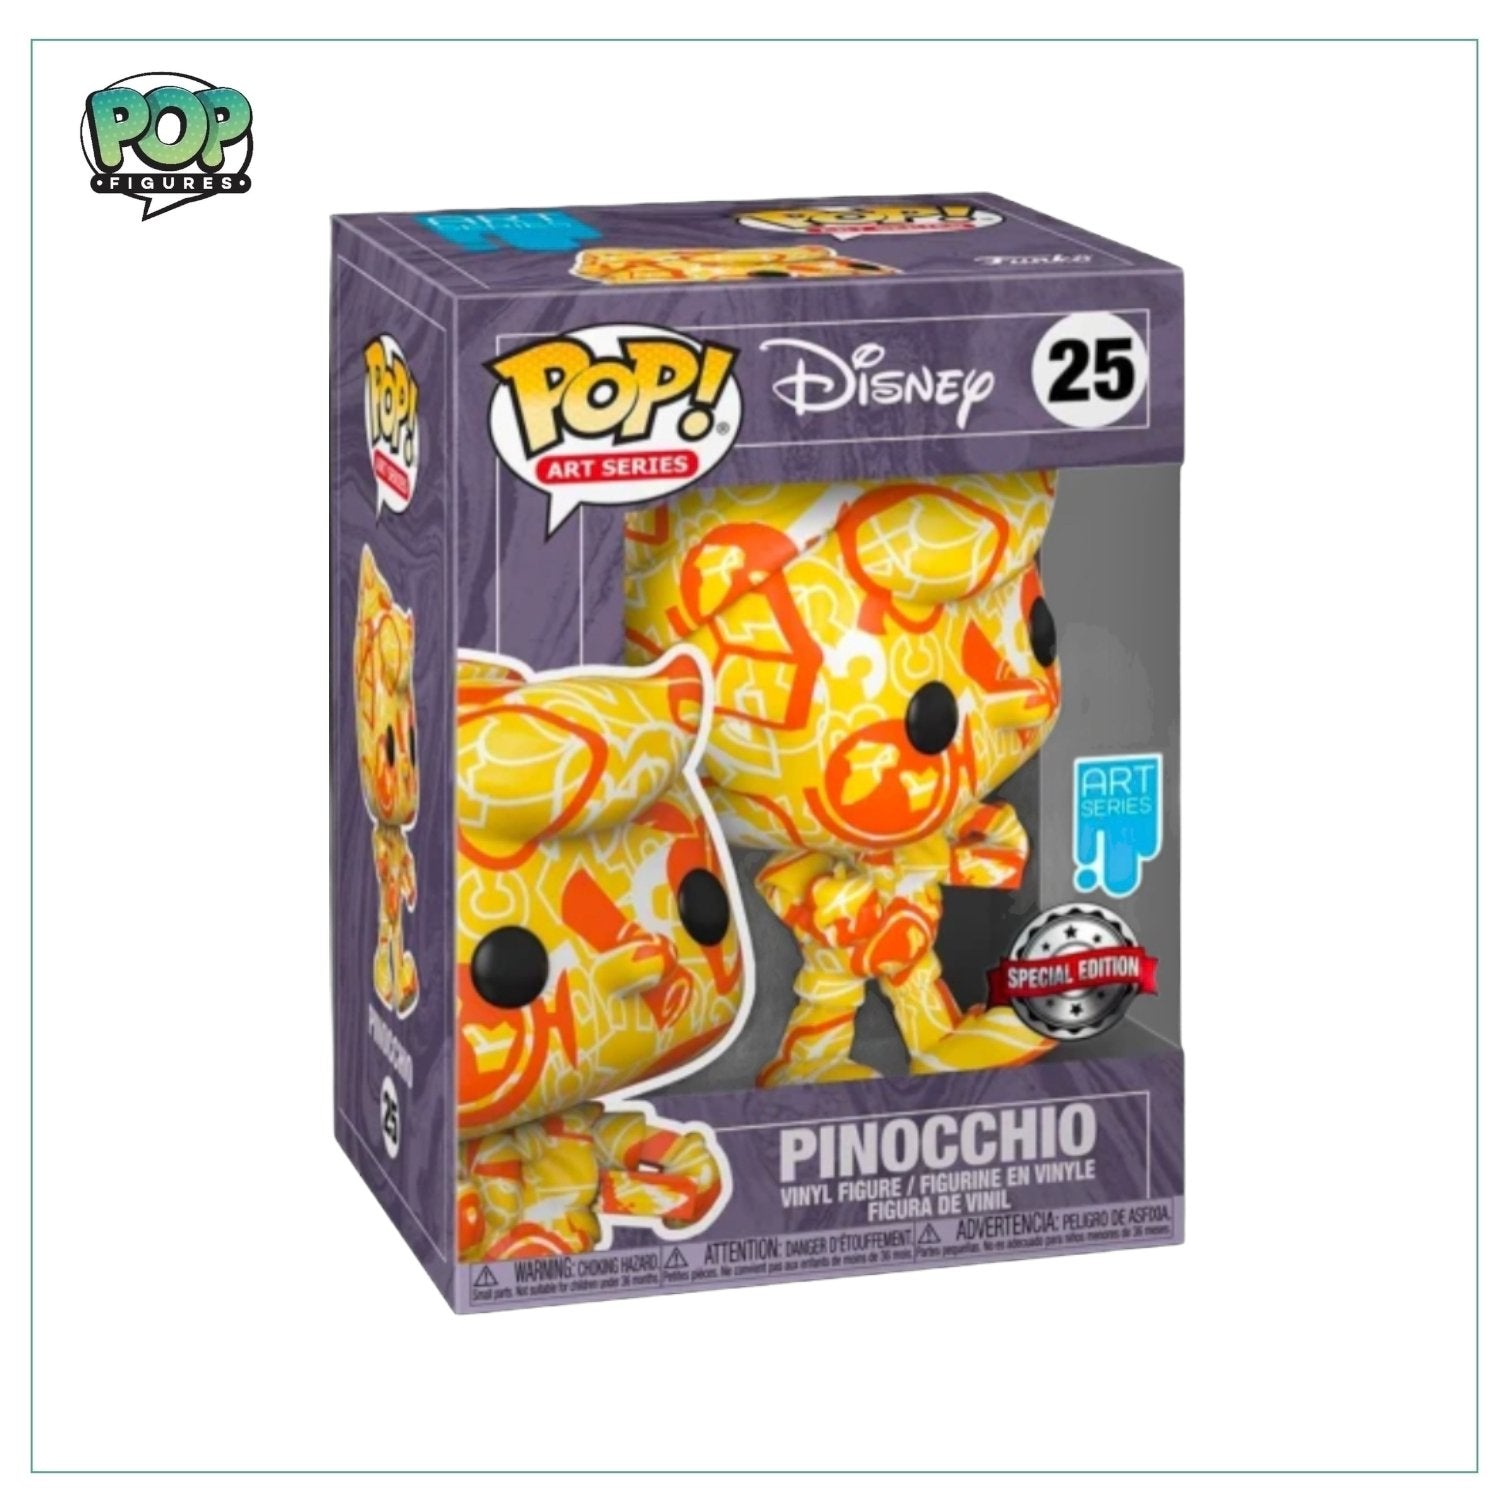 Pinocchio #25 Funko Pop! - Disney Art Series - Special Edition - Angry Cat